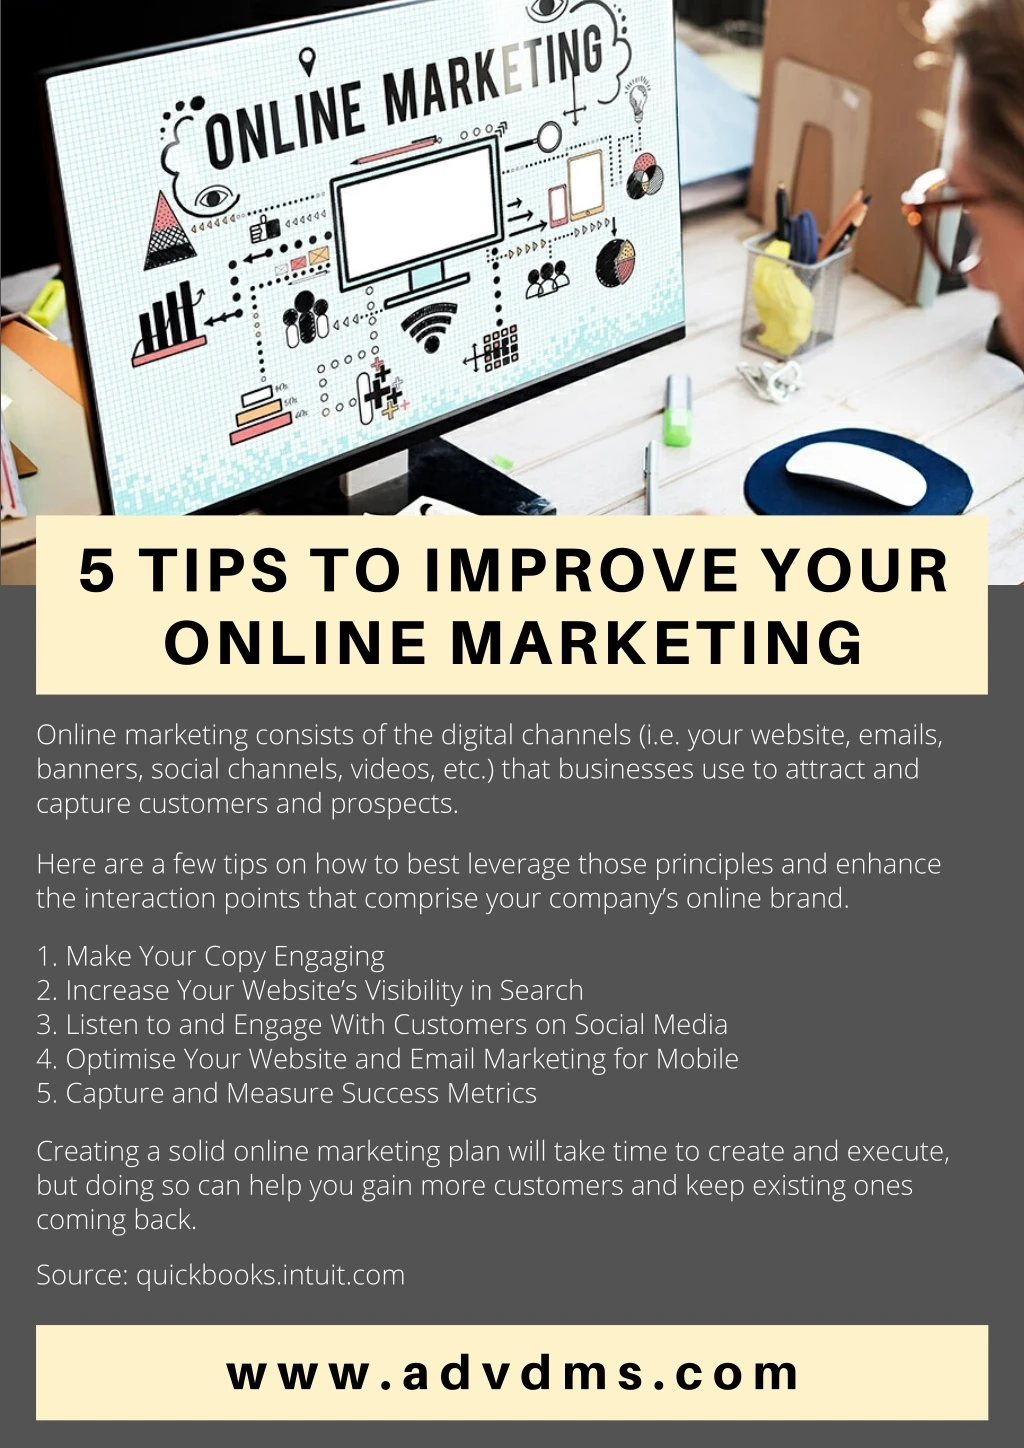 5 tips to improve your online marketing